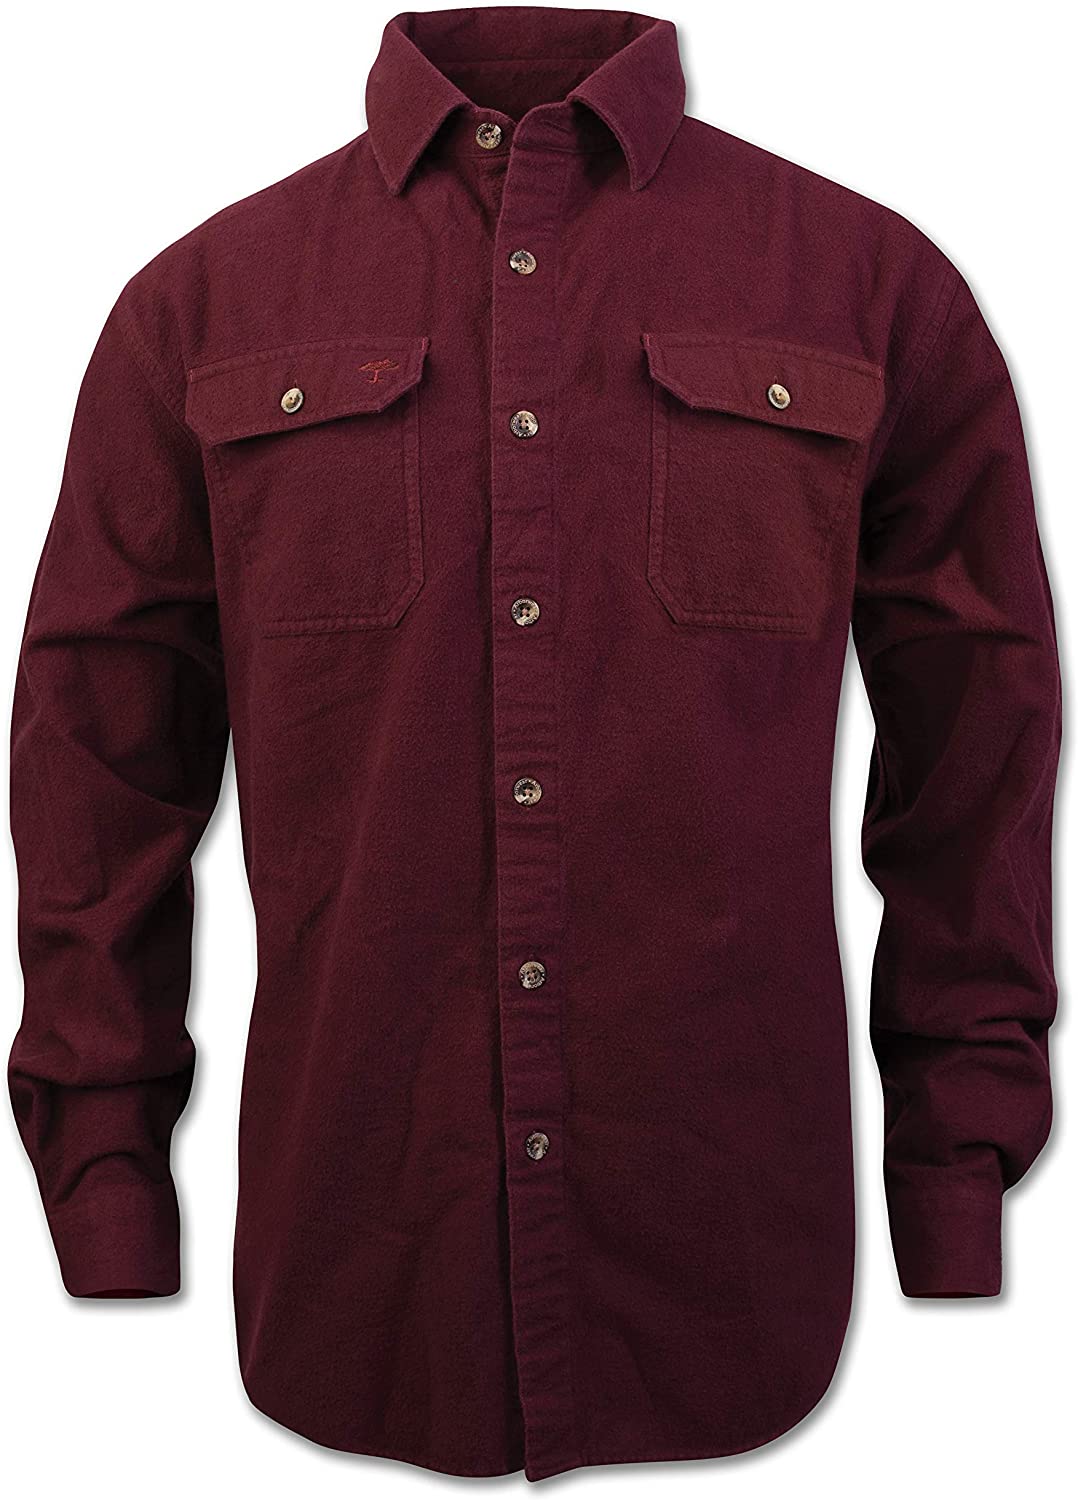 https://www.outdoorequipped.com/cdn/shop/products/arborwear-mens-timber-chamois-shirt-maroon.jpg?v=1605624745